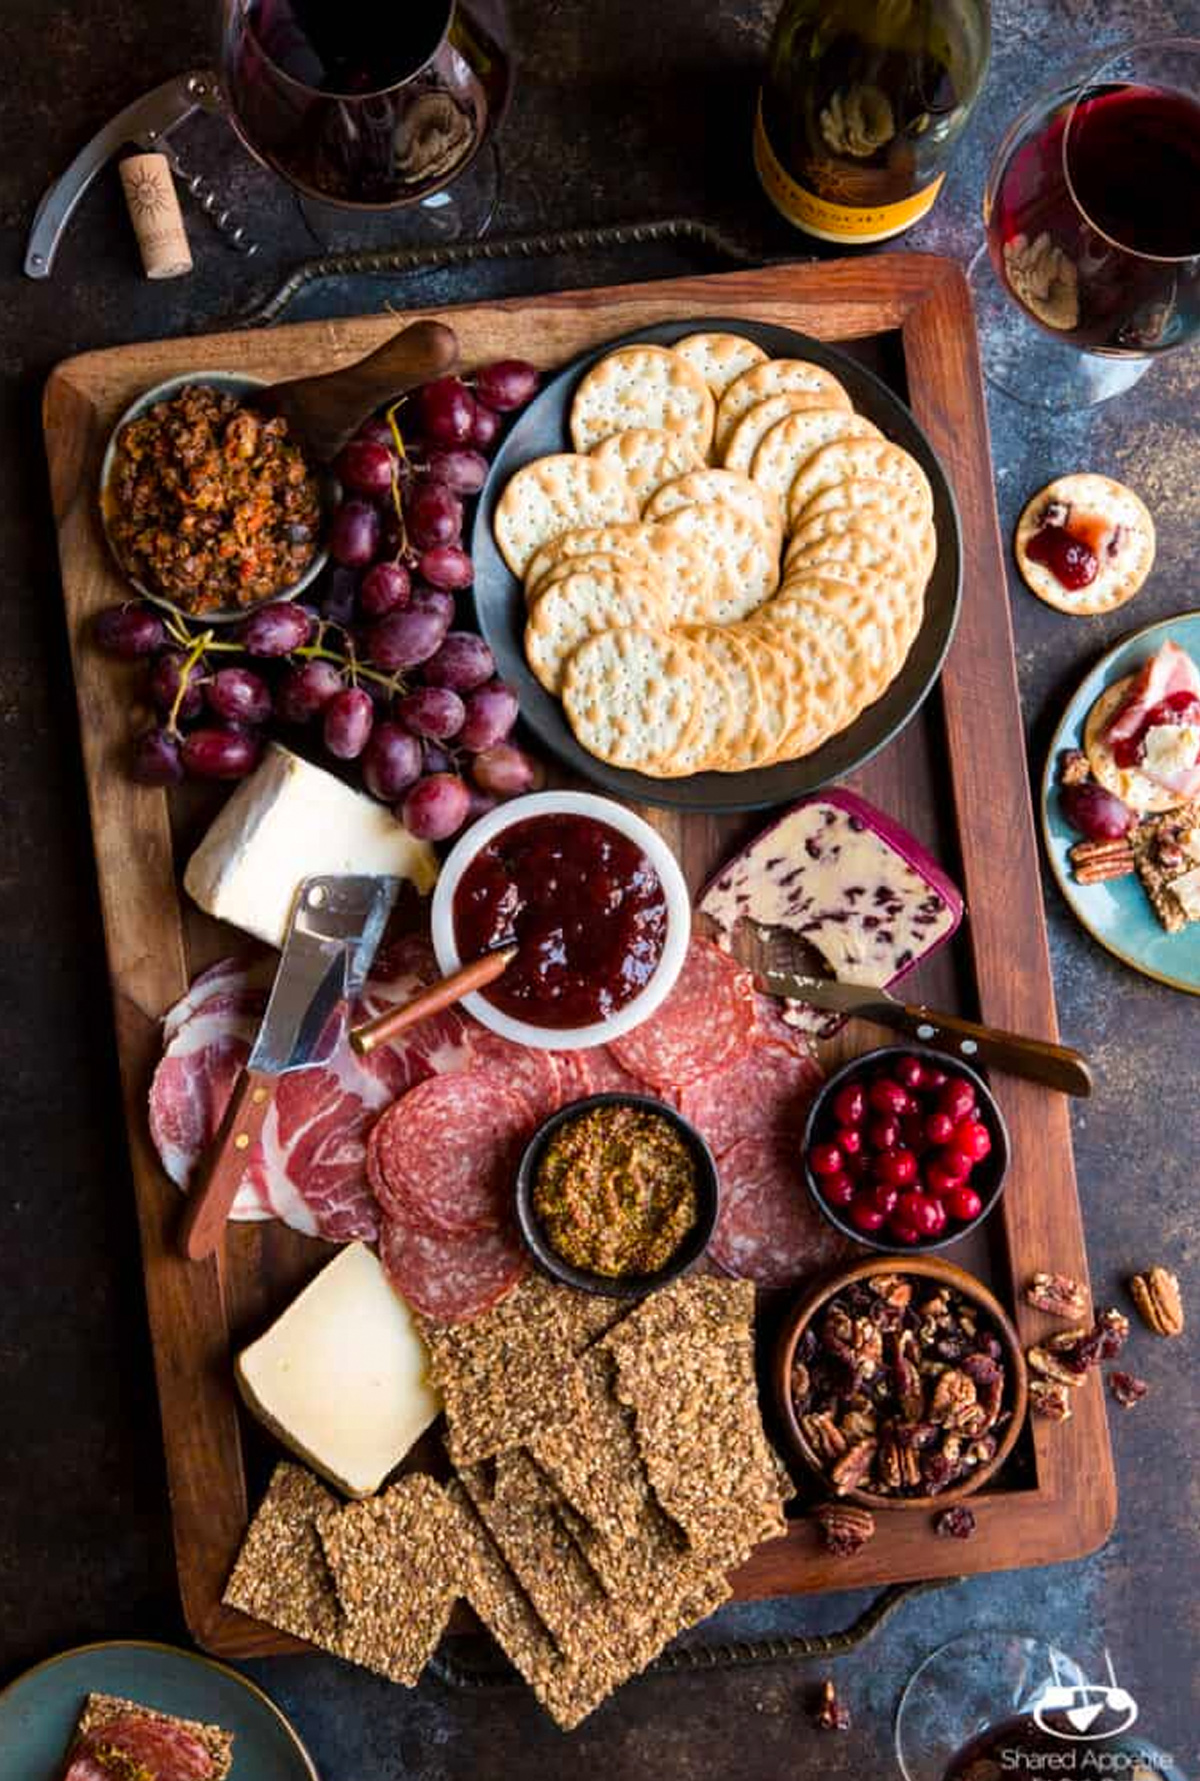 Shared Appetite's winter board includes cheese, crackers, grapes, and meat.